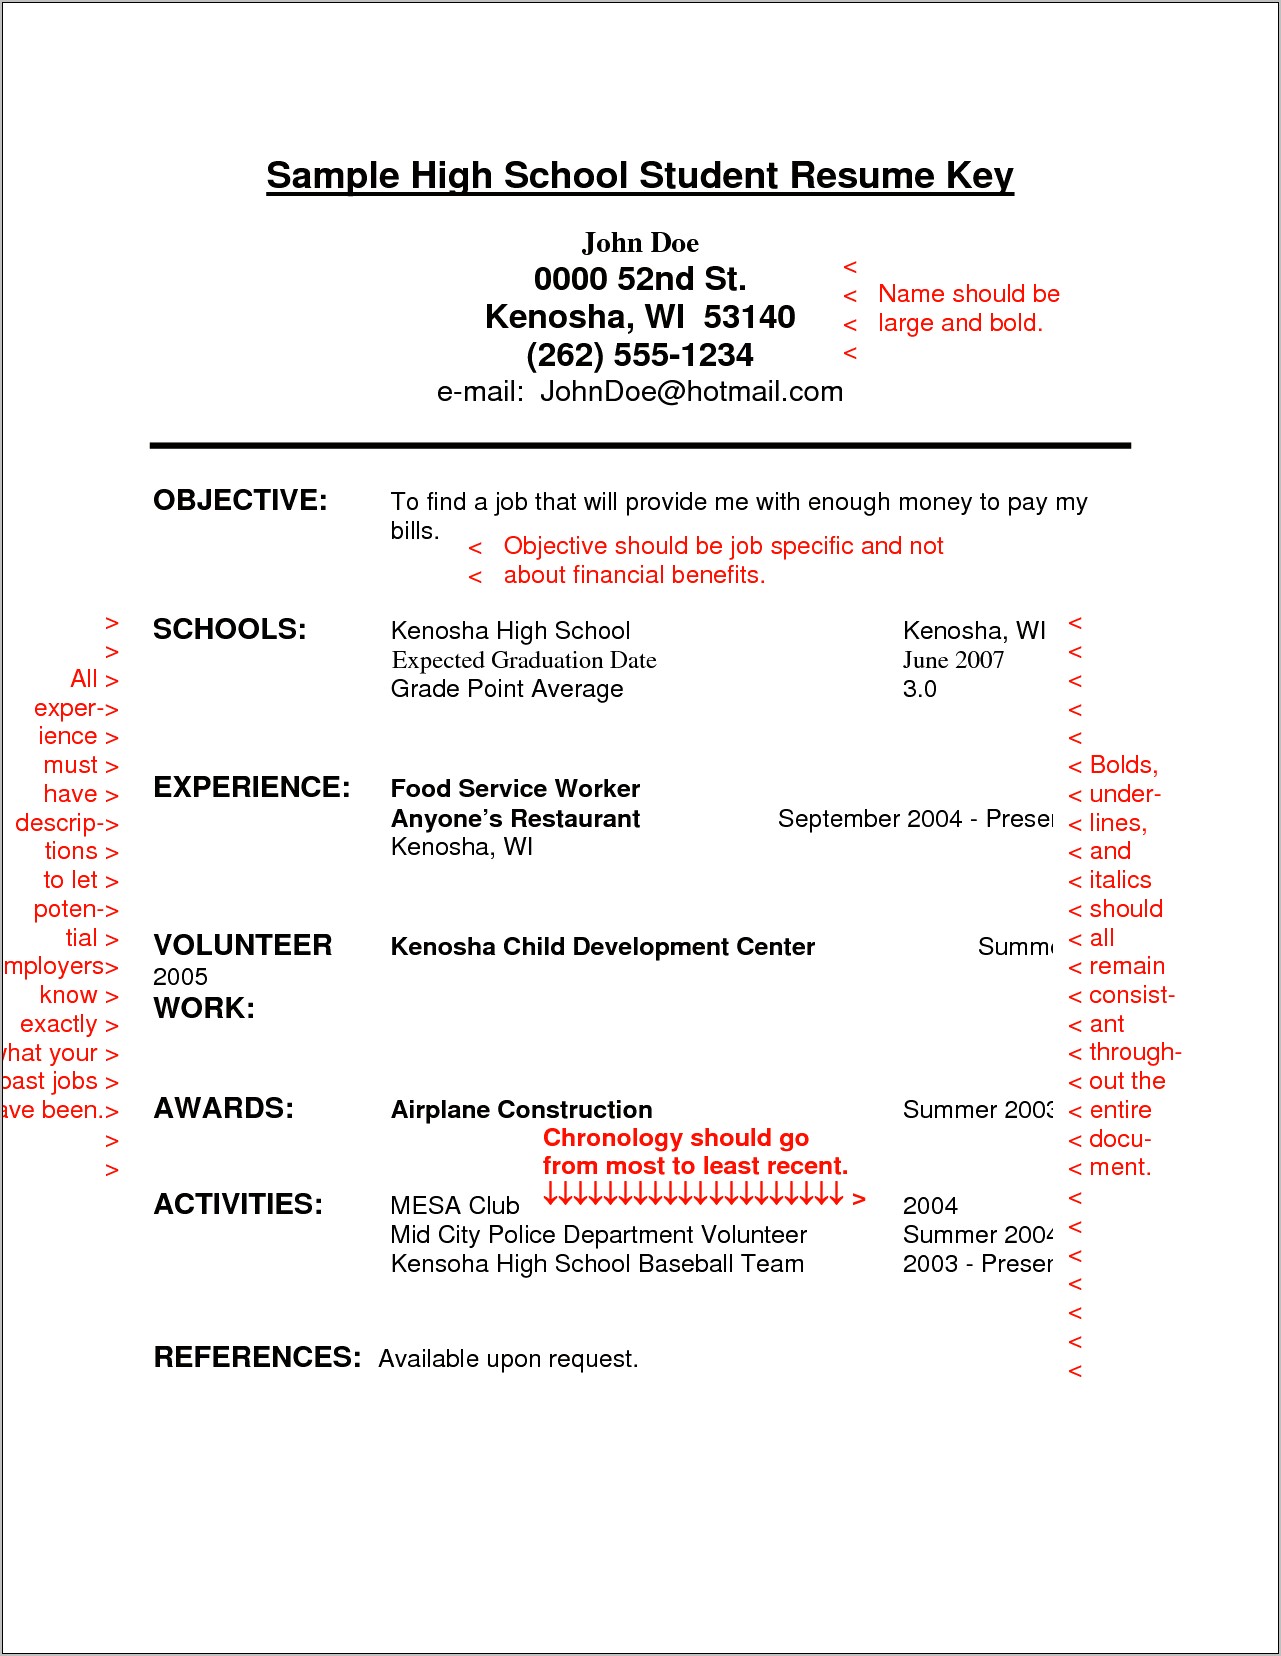 Resume Expected Graduation Date Example